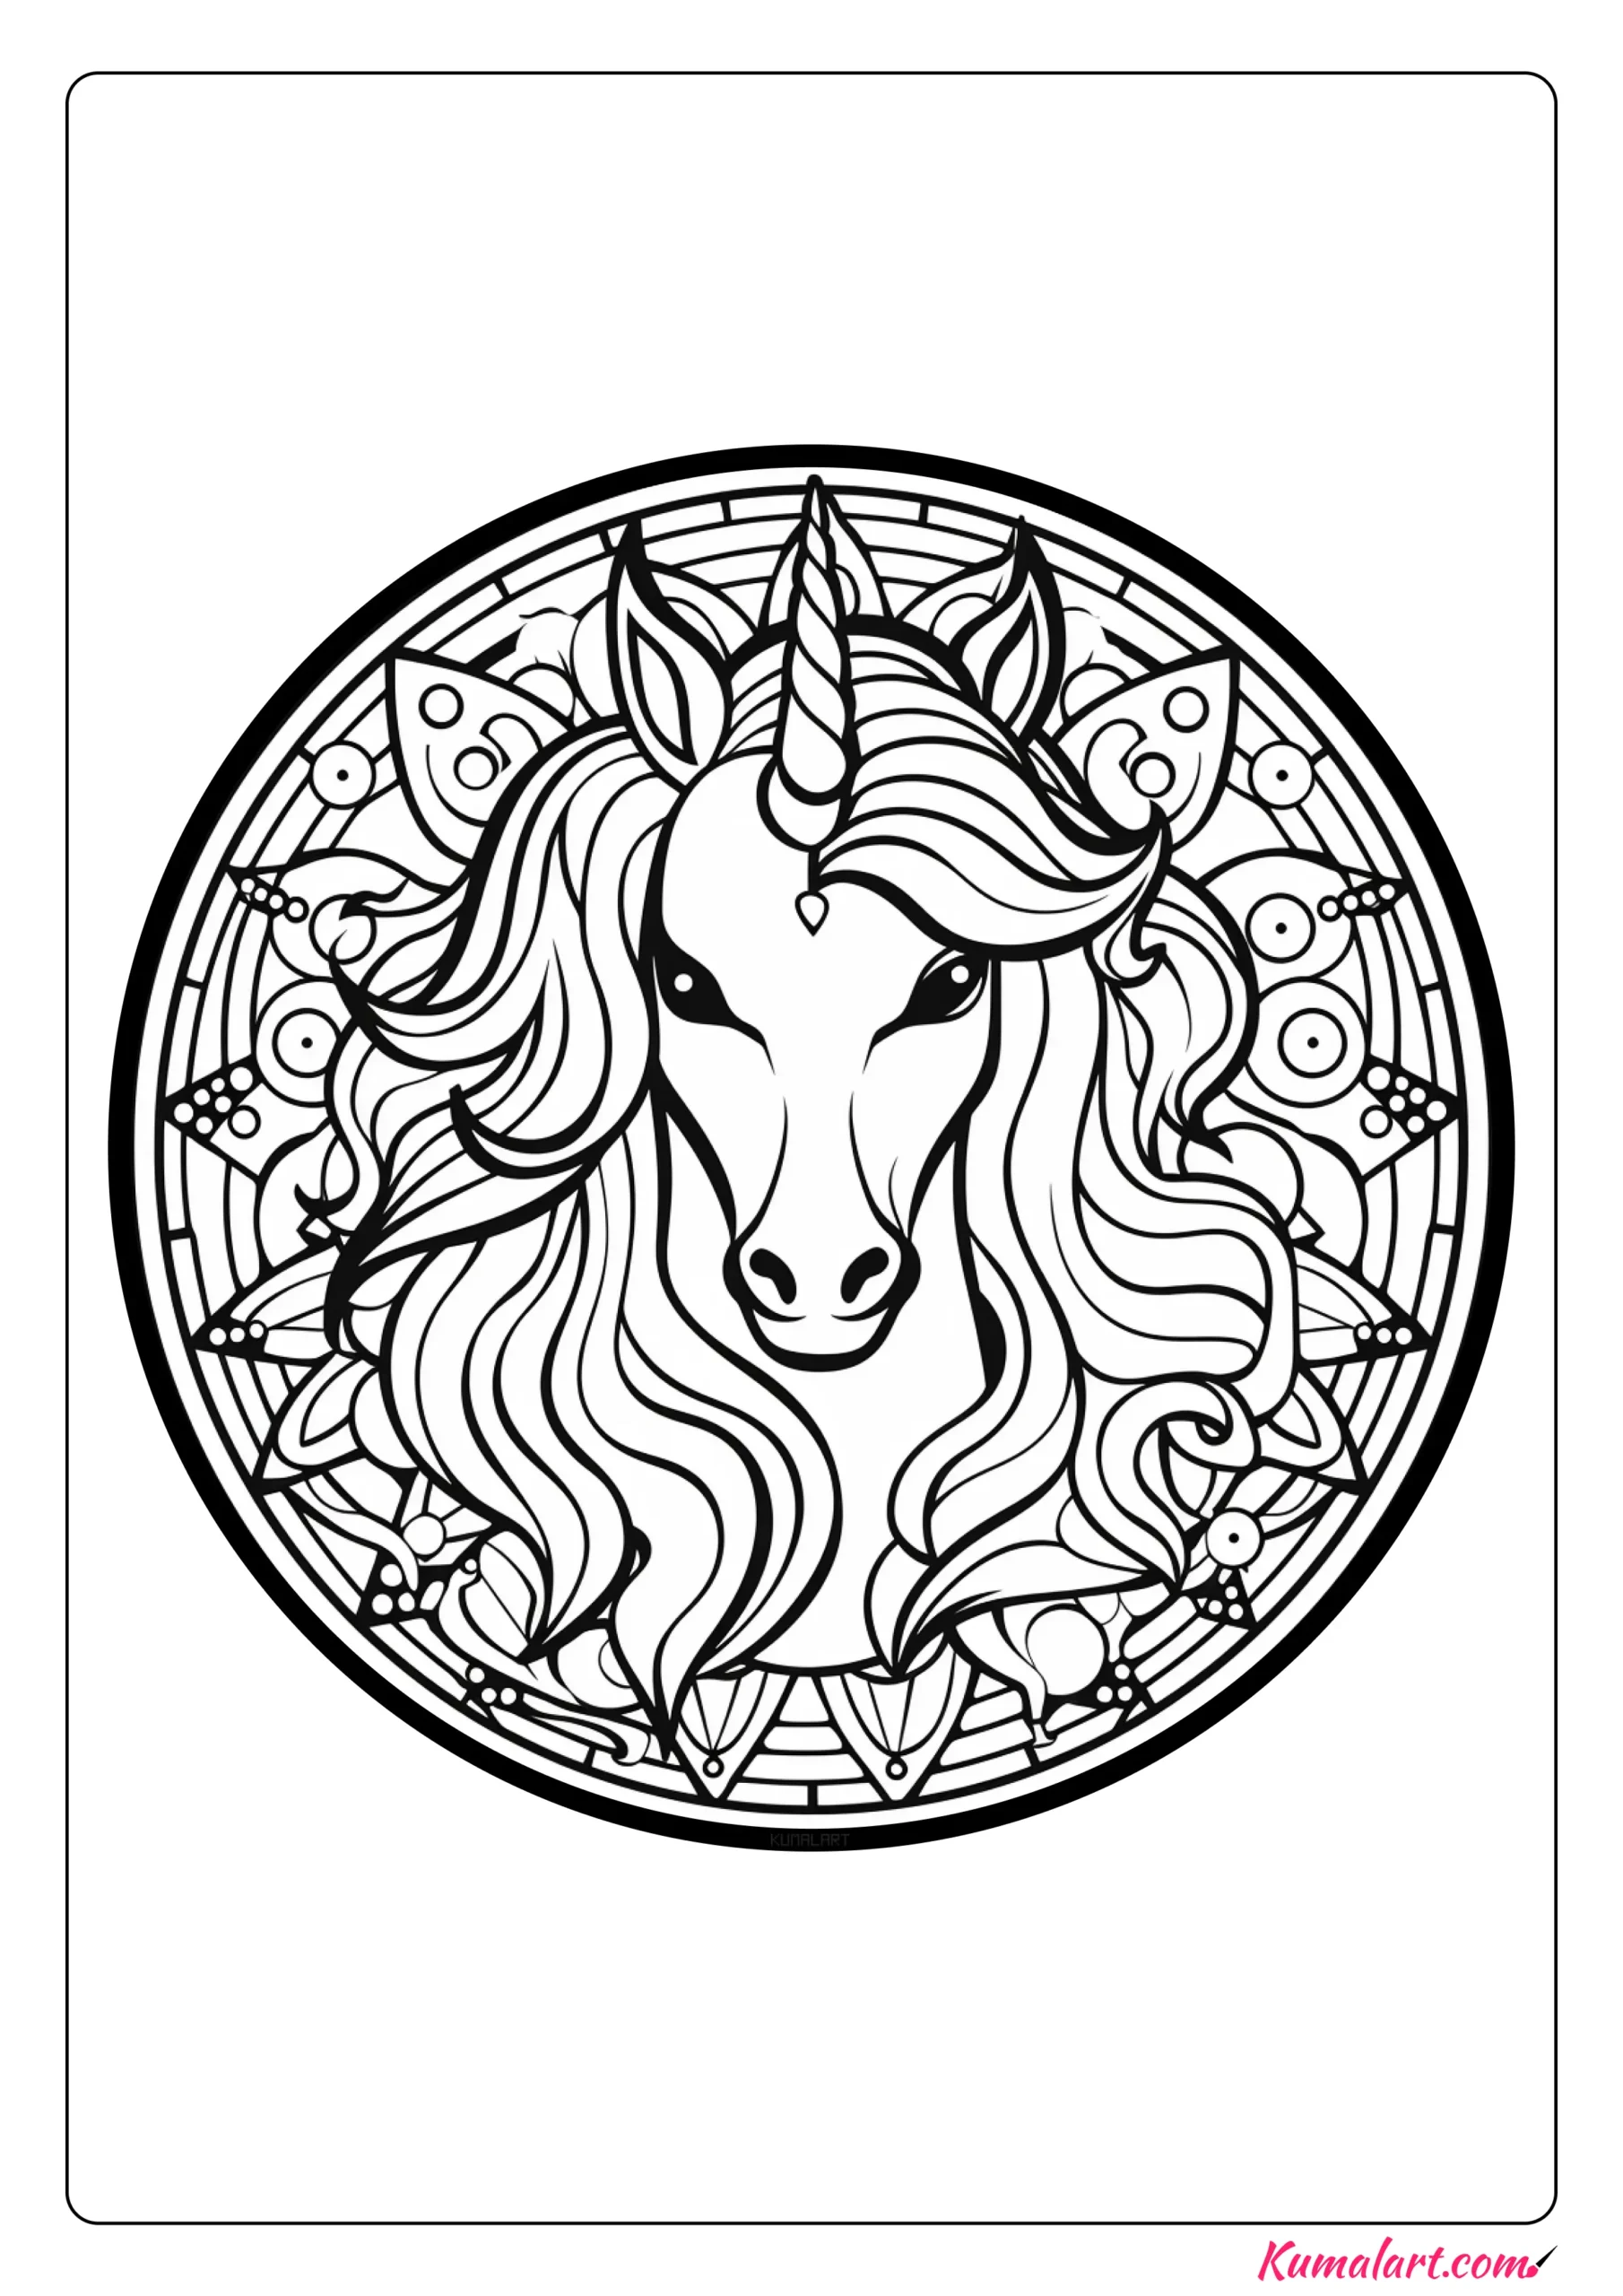 Argus the Unicorn Coloring Page